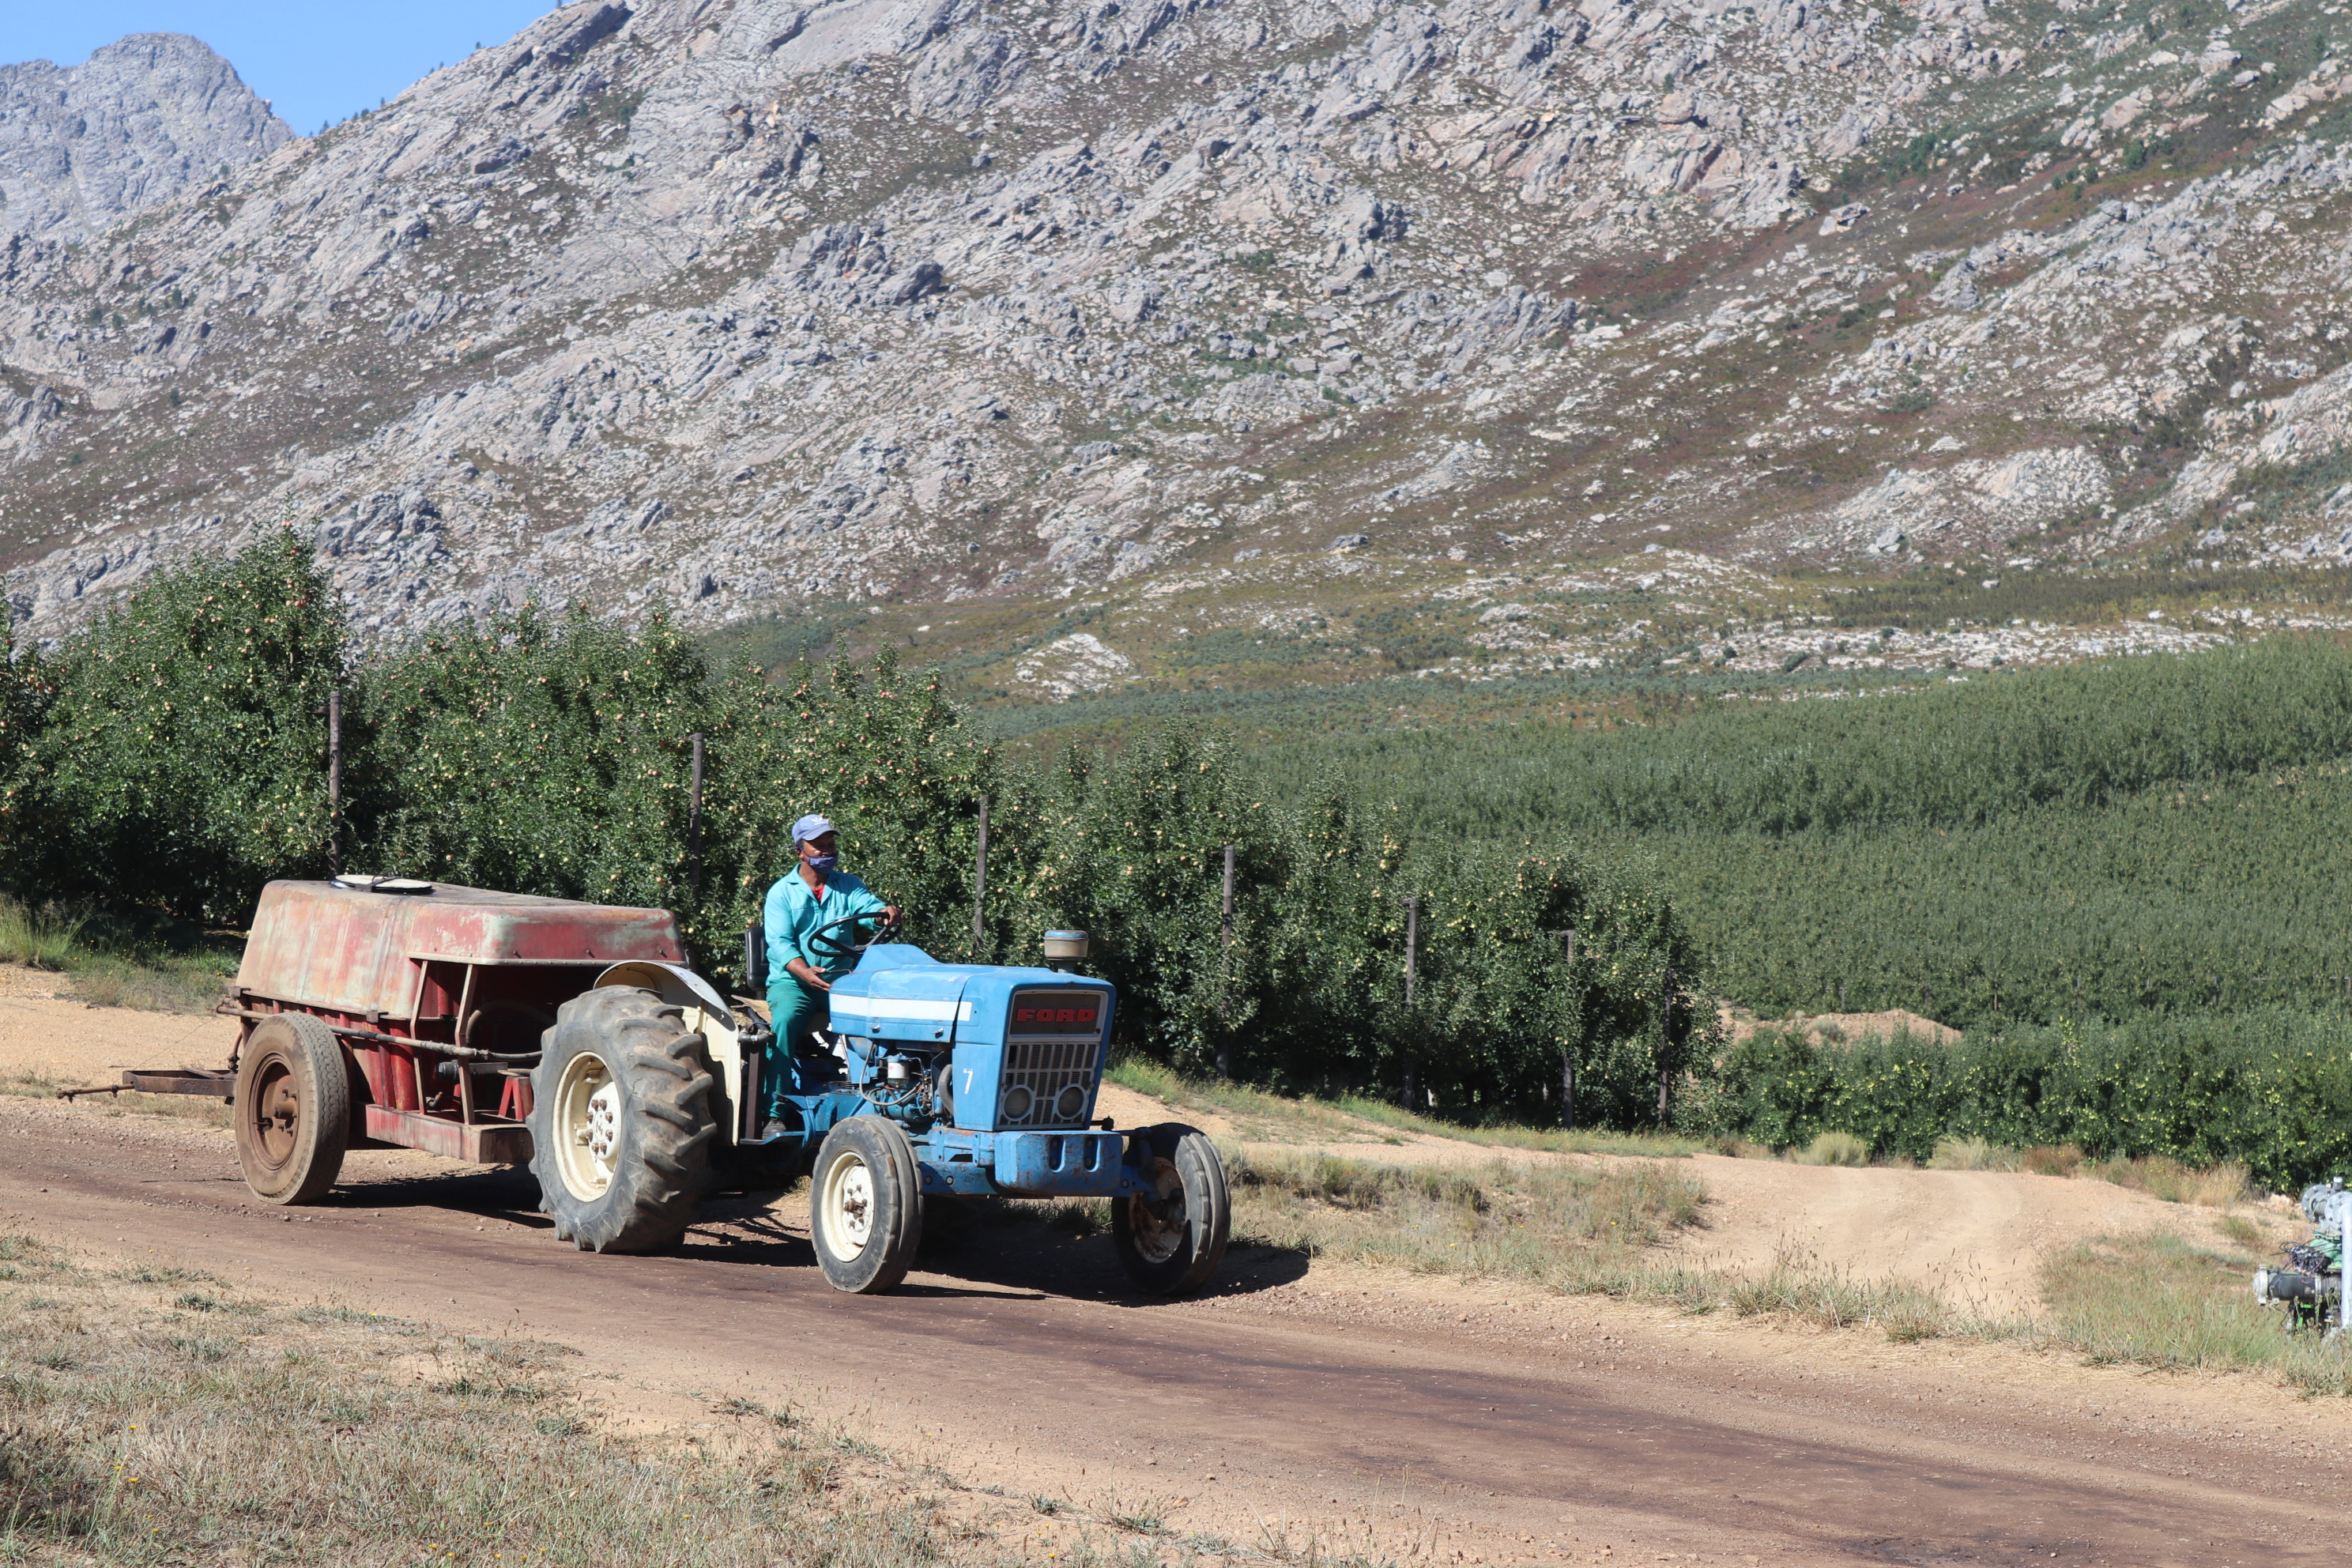 Most fruit farms in South Africa consist of a series of unsealed dirt roads or tracks to transport picked fruits